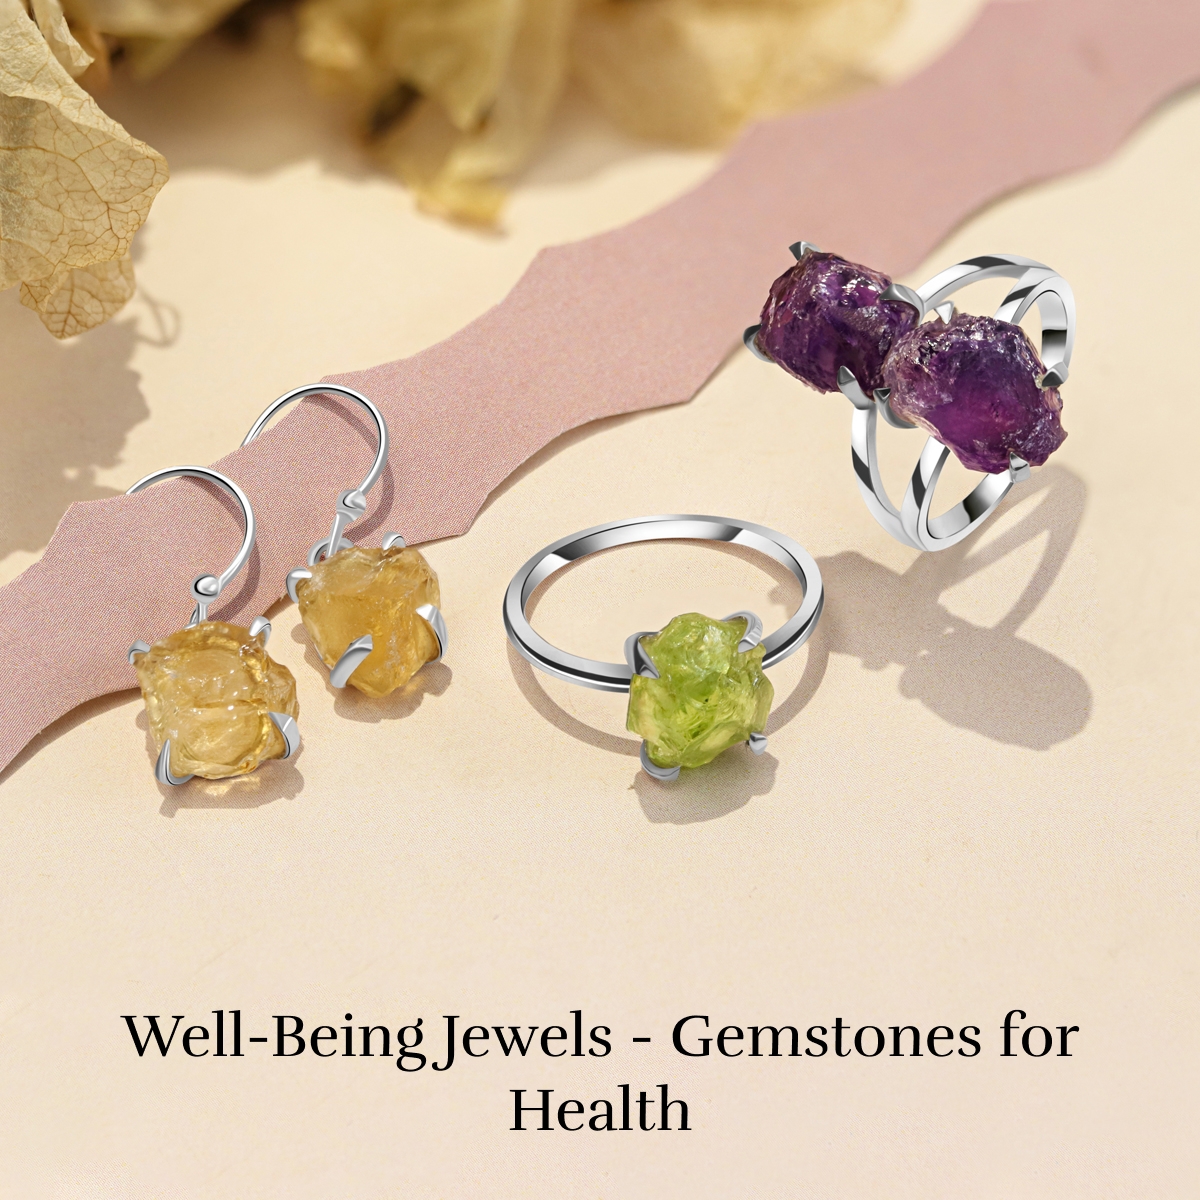 Gemstones For Your Good Health